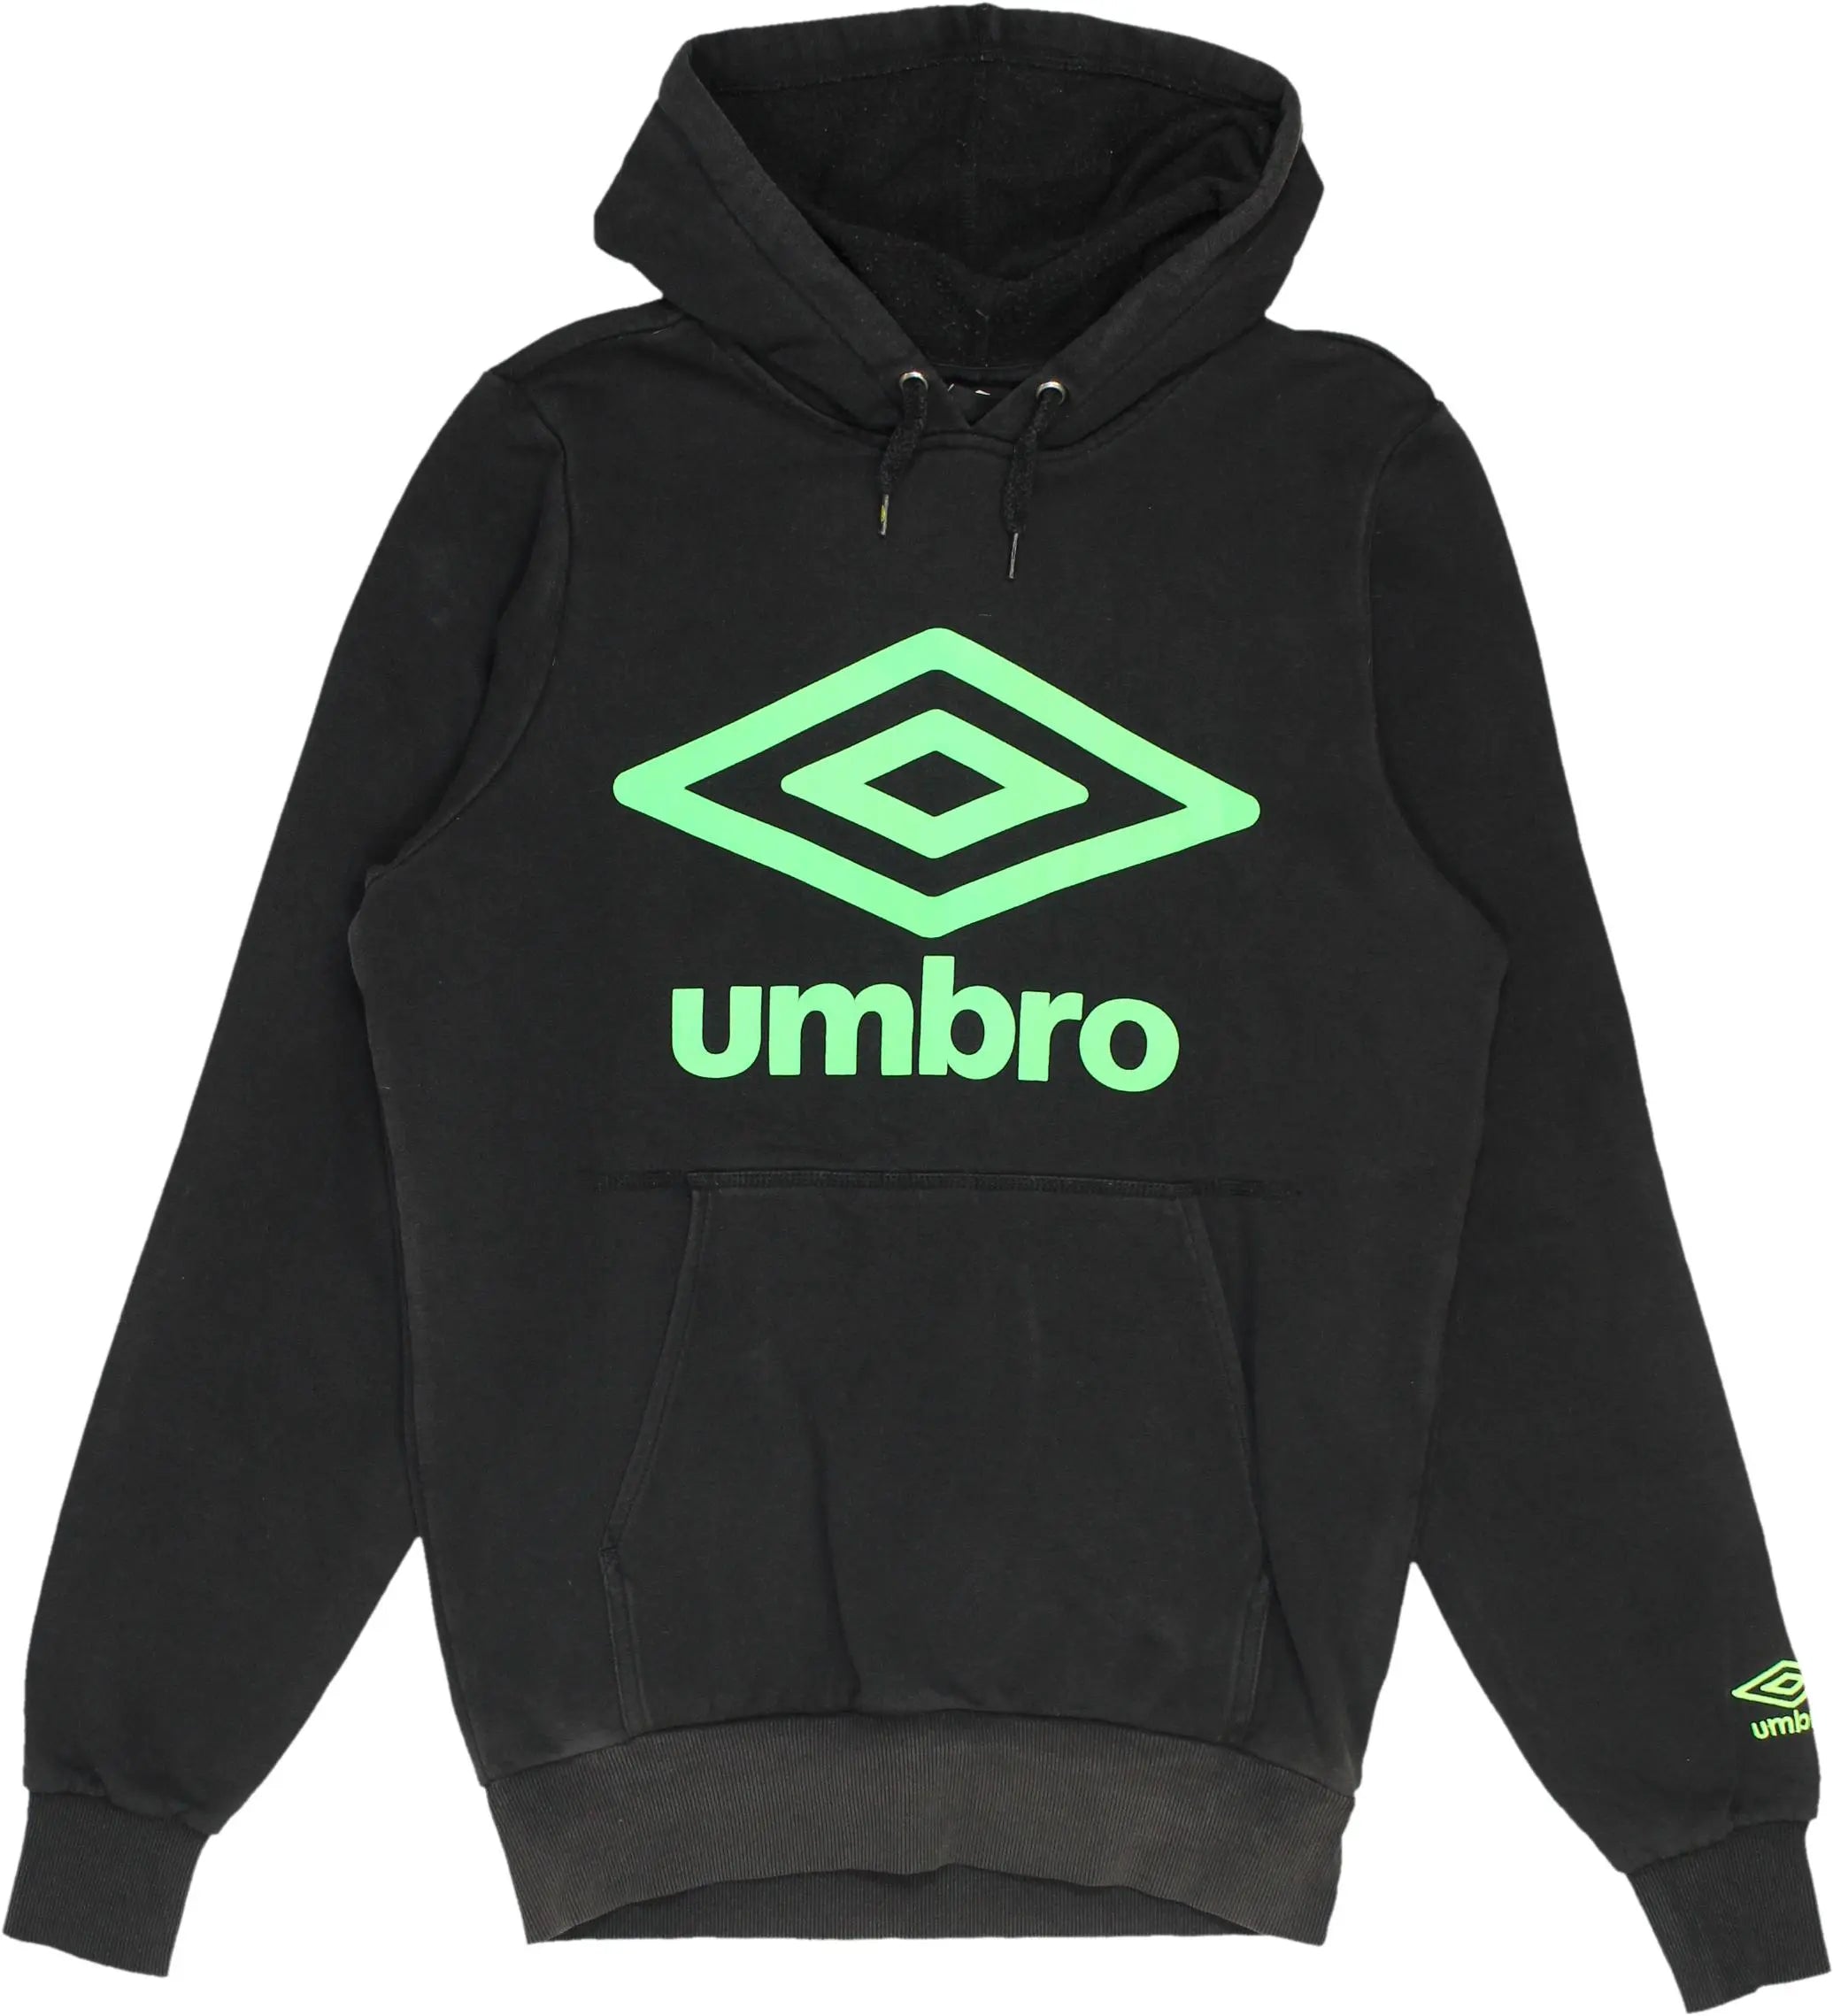 Umbro - Black Hoodie by Umbro- ThriftTale.com - Vintage and second handclothing